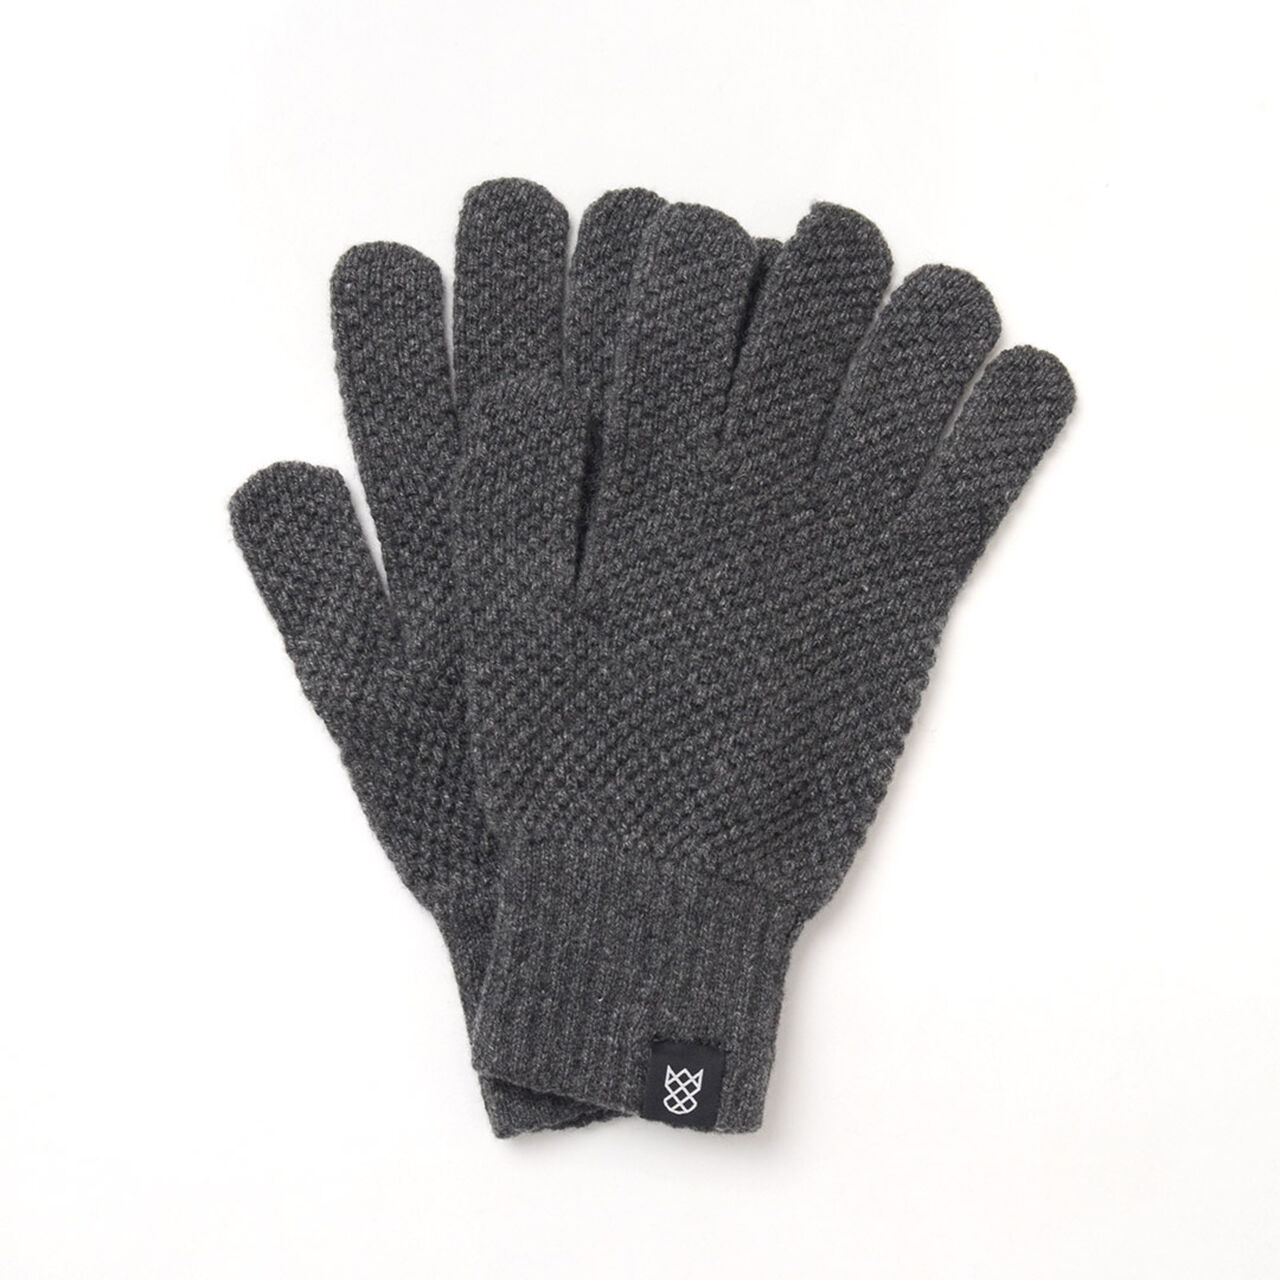 Special Order Tuck Stitch Knit Gloves,Charcoal, large image number 0